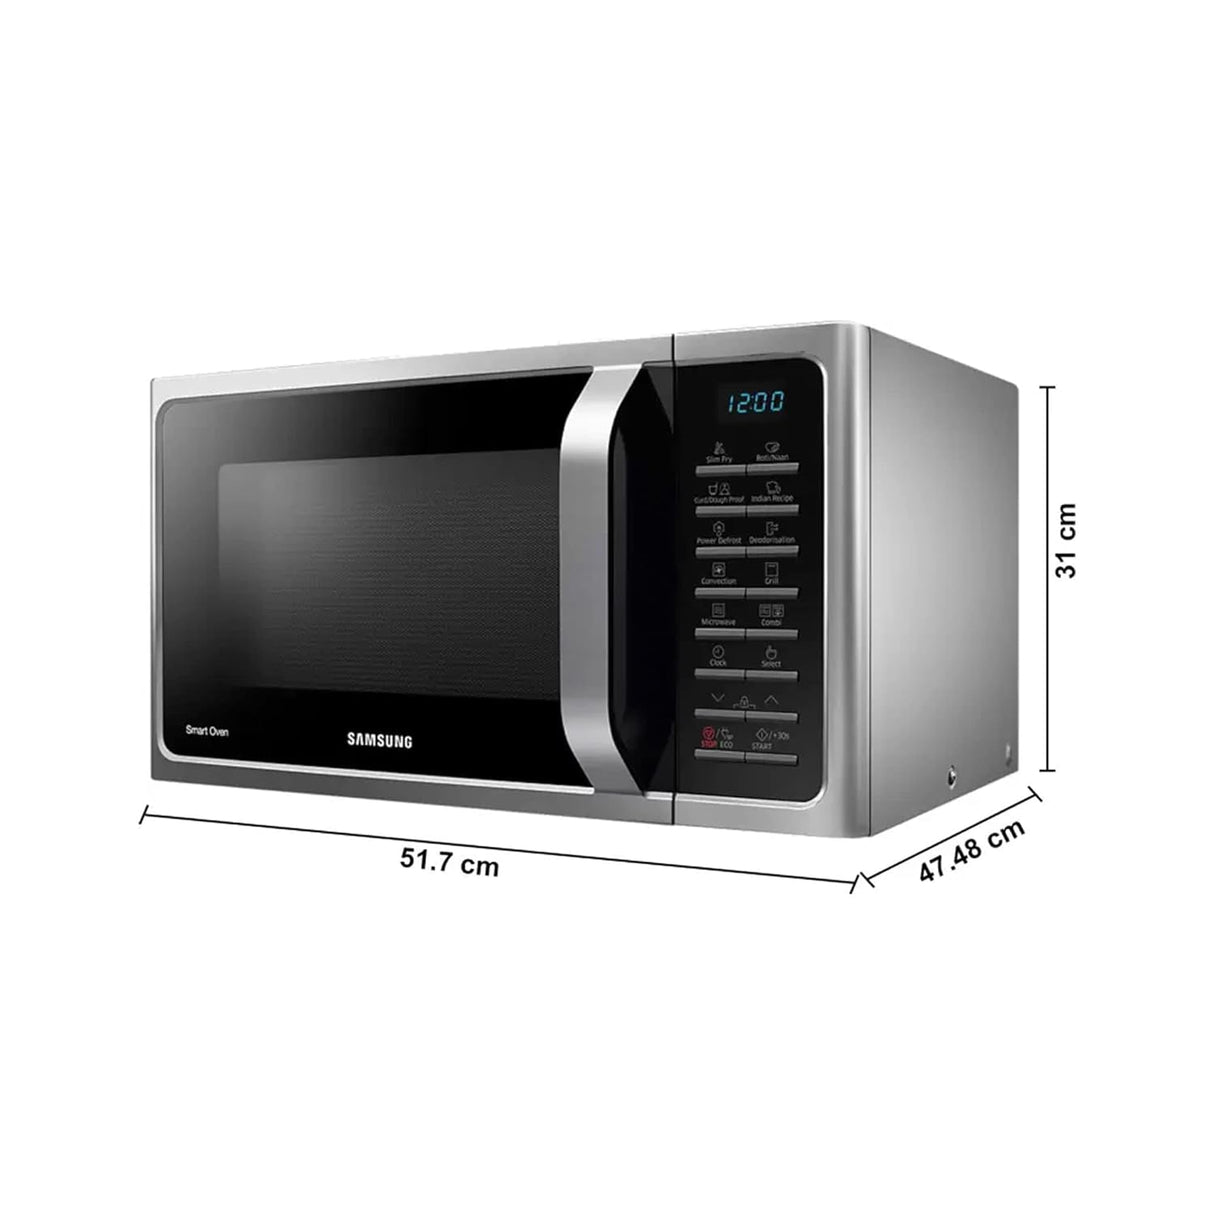 Samsung 28L Convection Microwave: Elevate your kitchen experience.